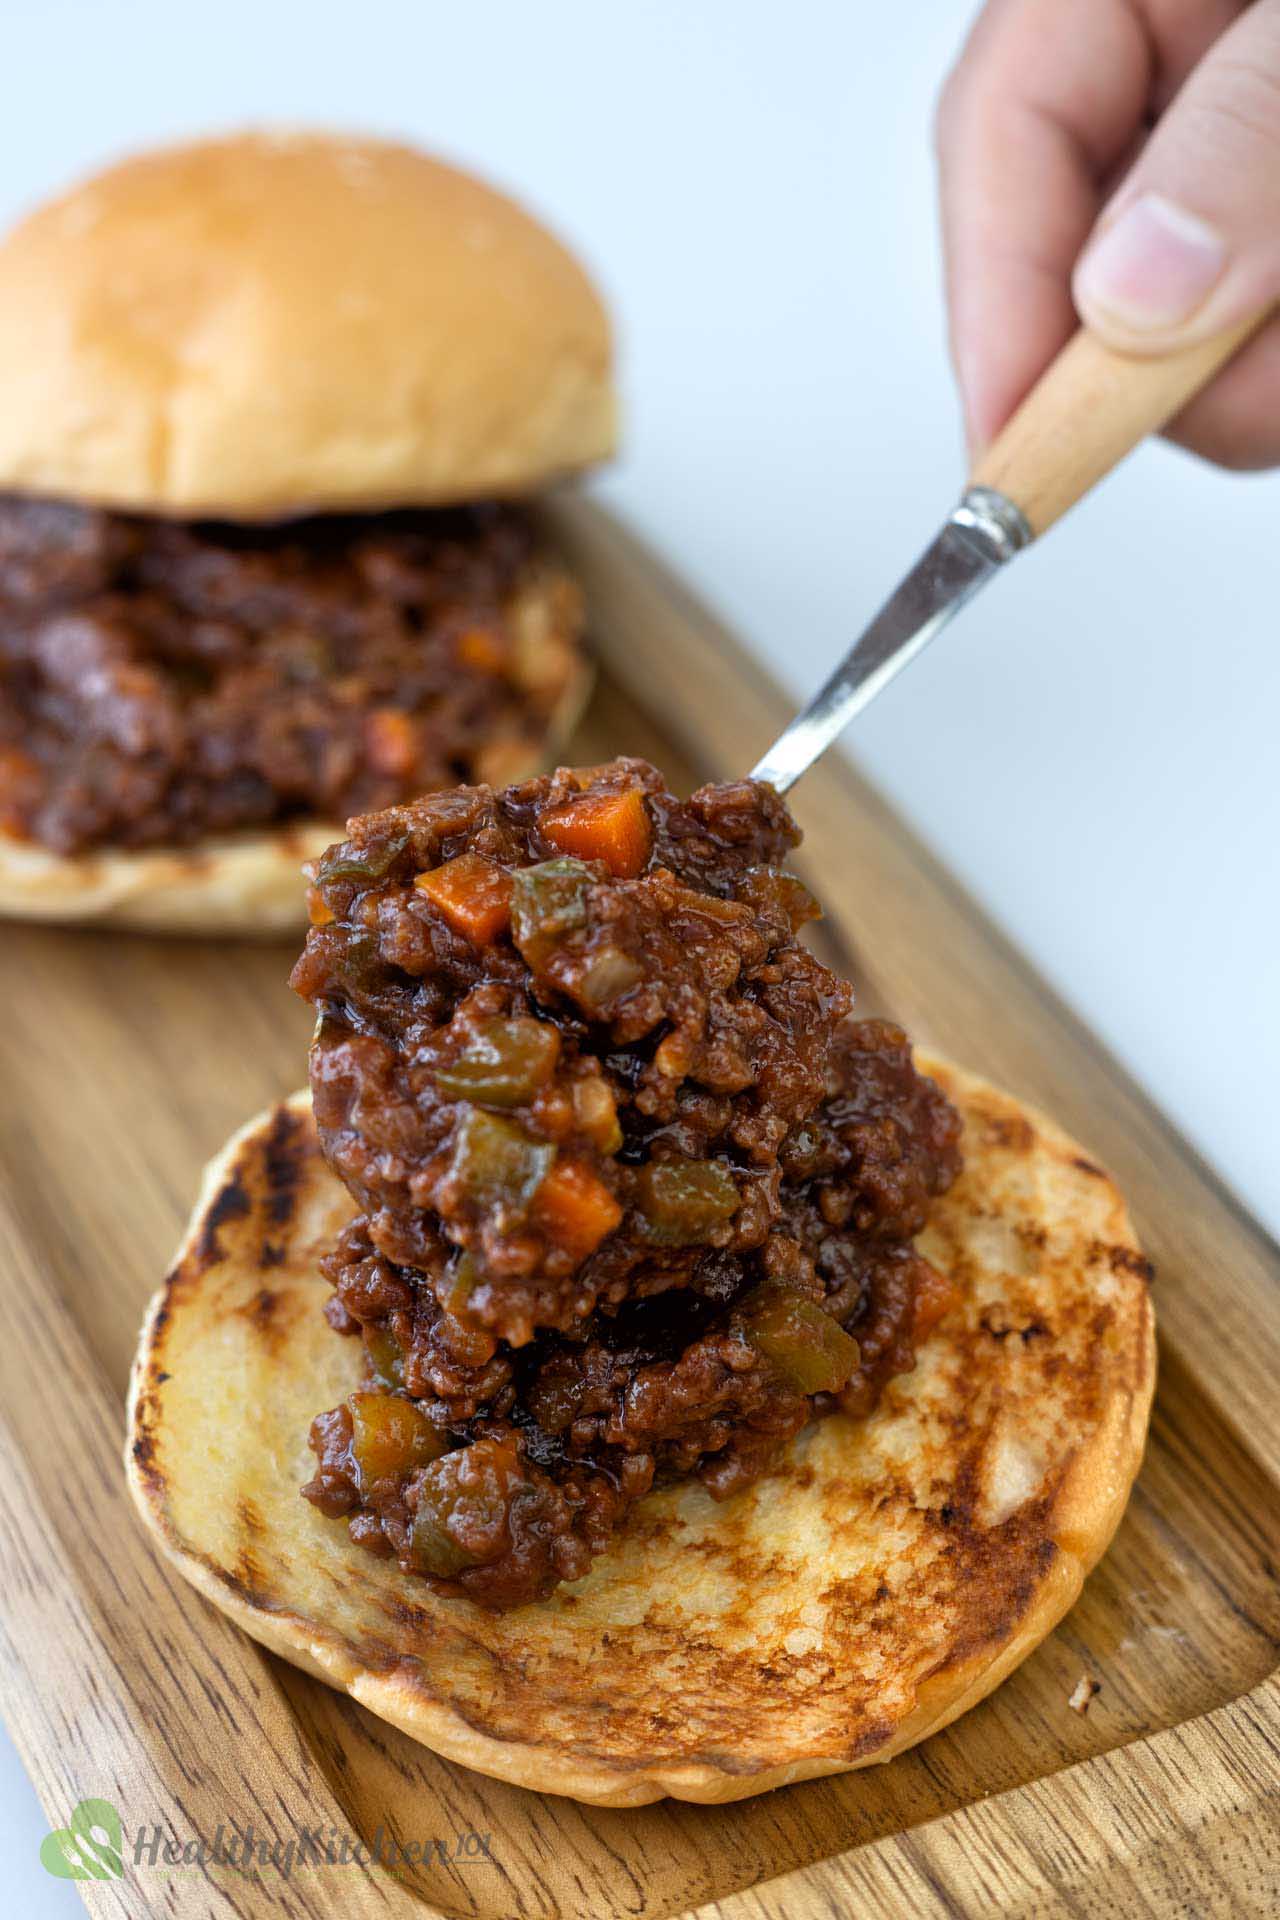 A Sloppy Joe Recipe With Refreshing Side-dish Suggestions